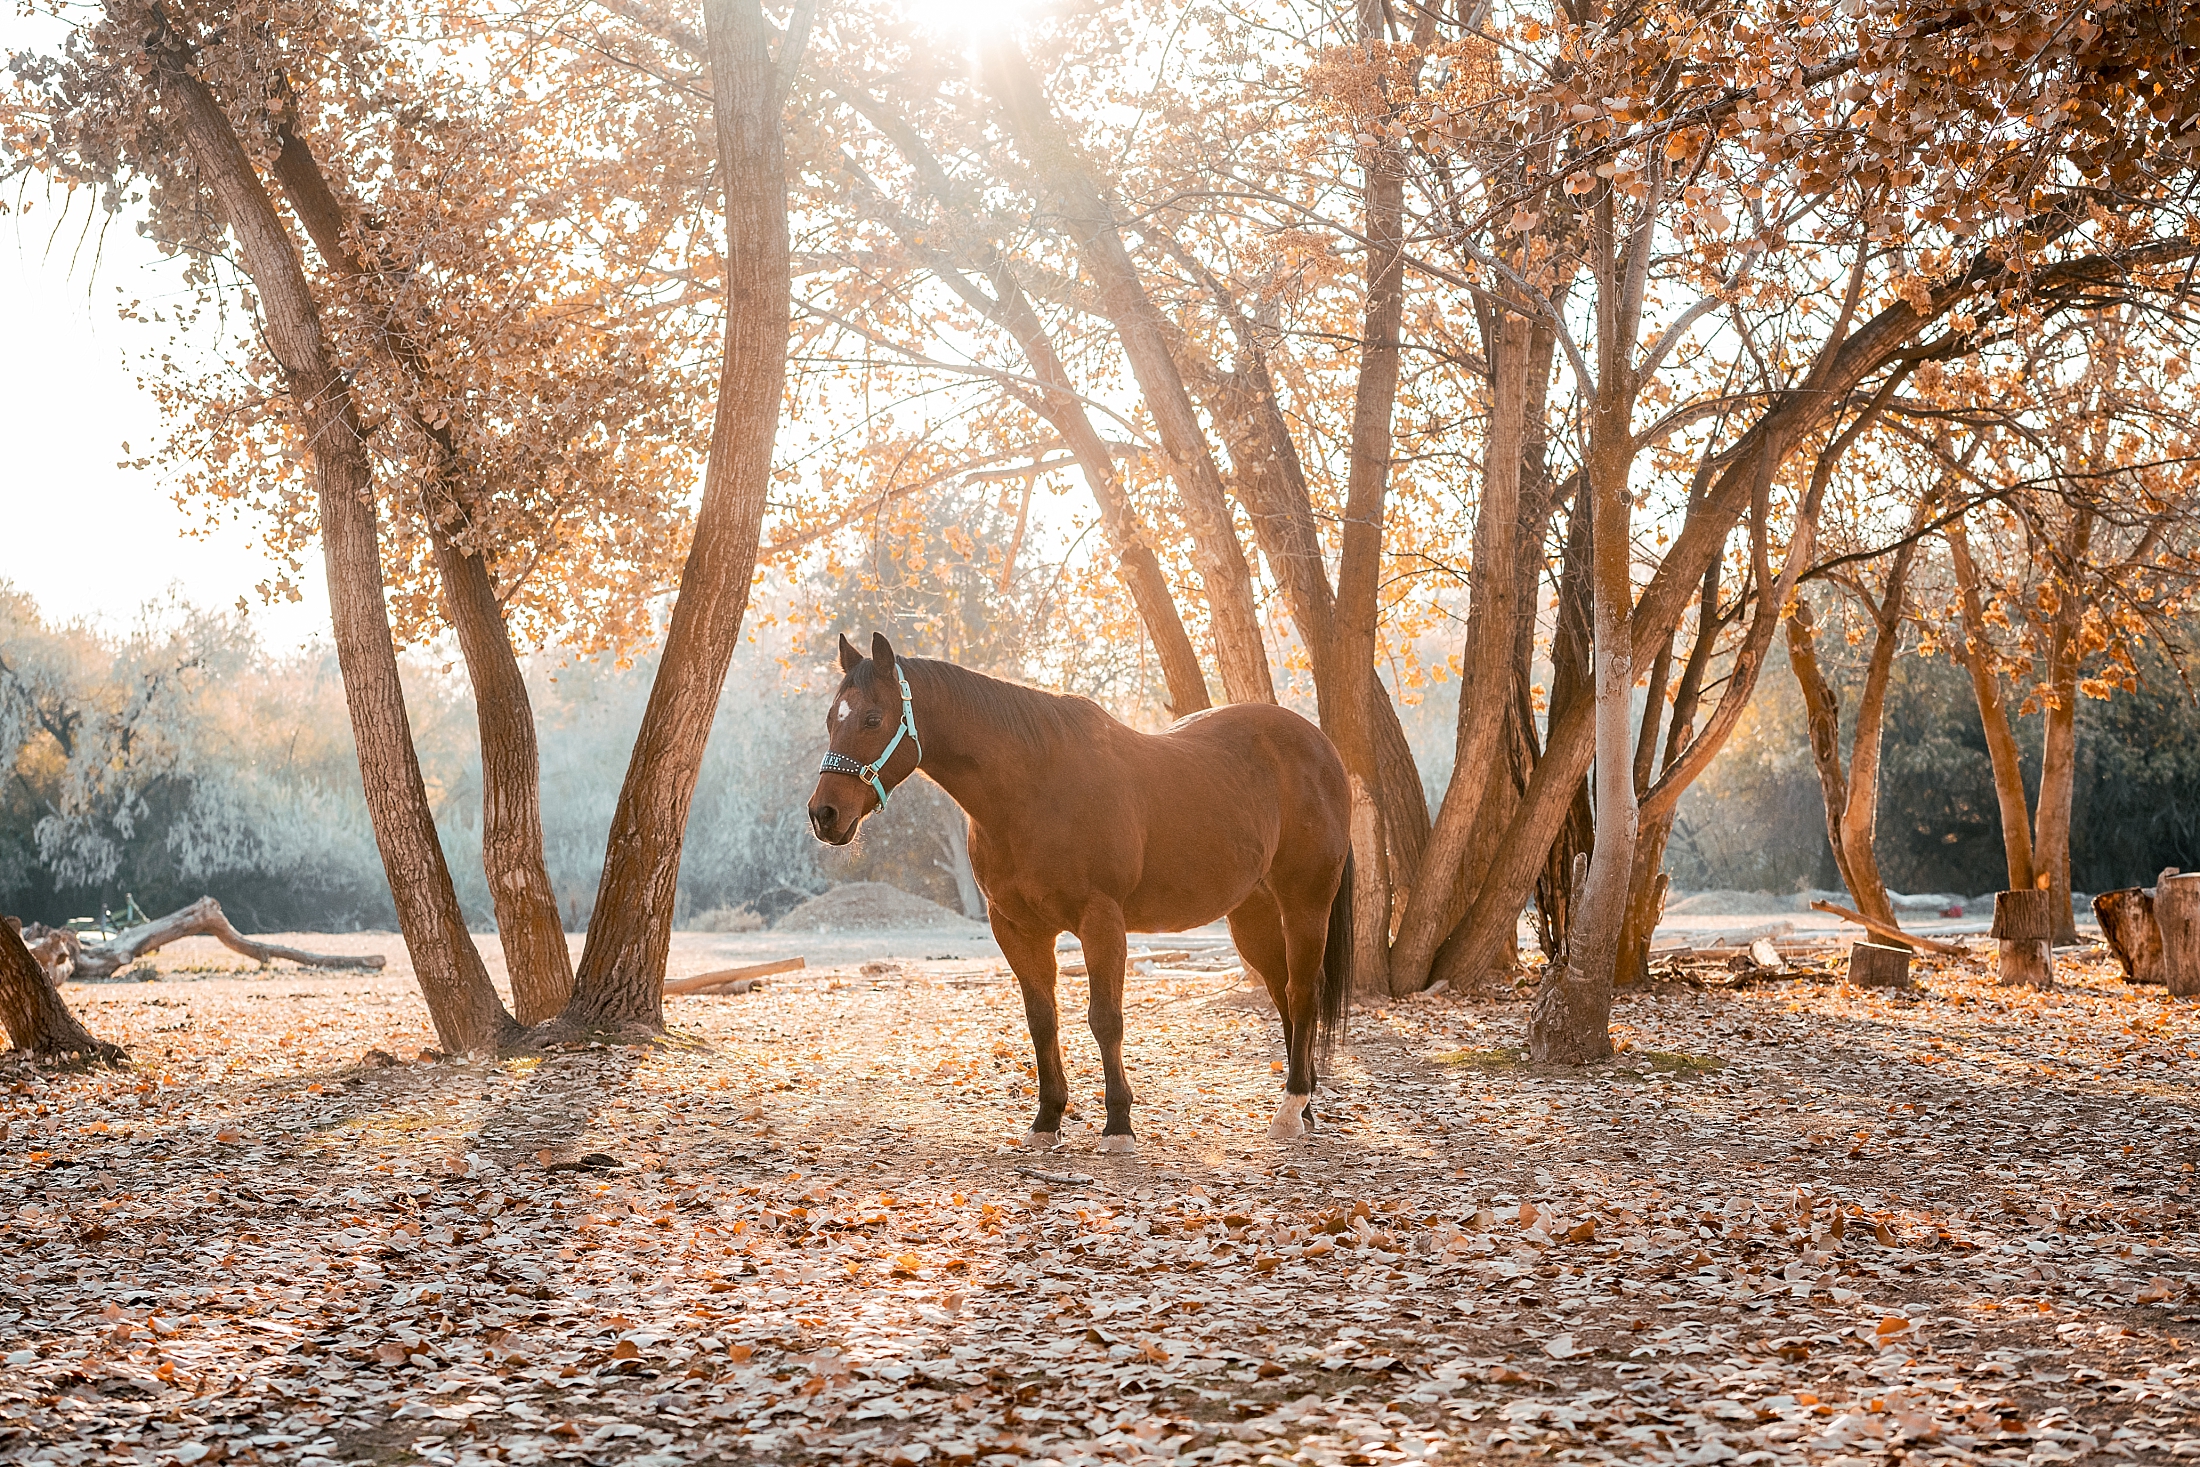 Bay horse standing in the trees with fall leaves at sunset